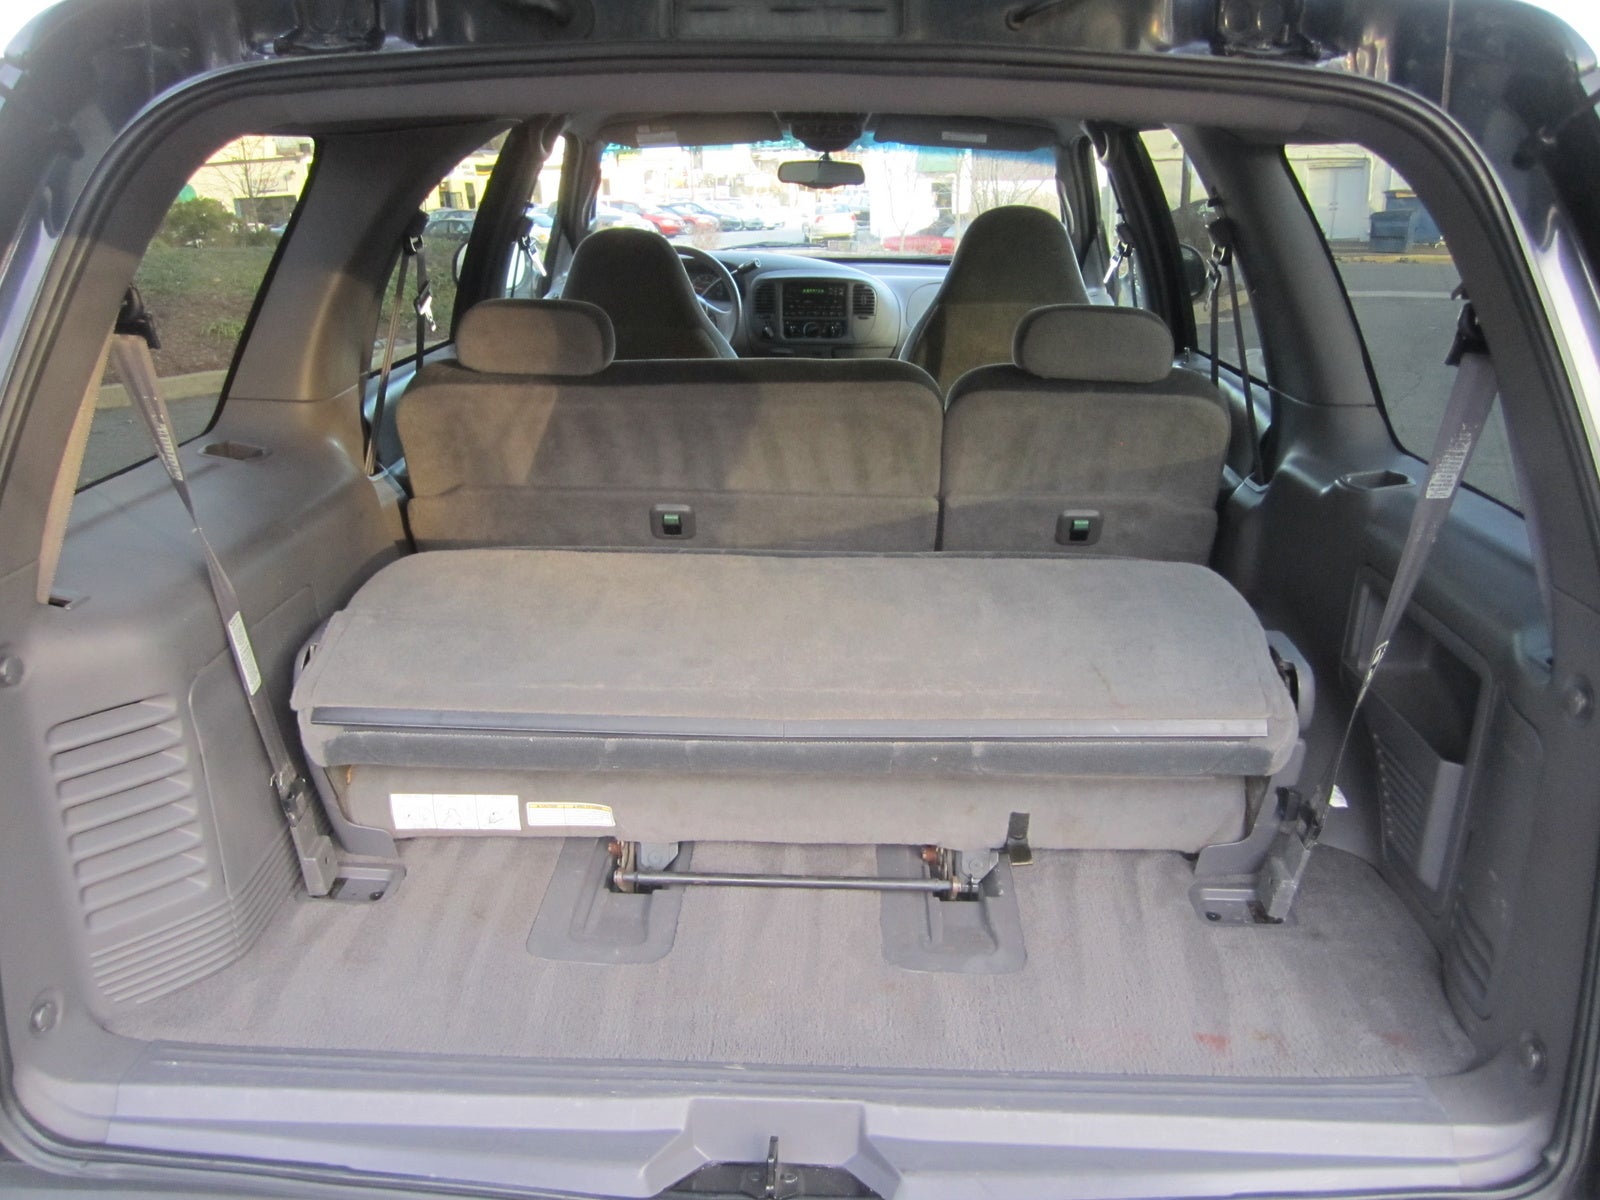 2000 Ford expedition interior